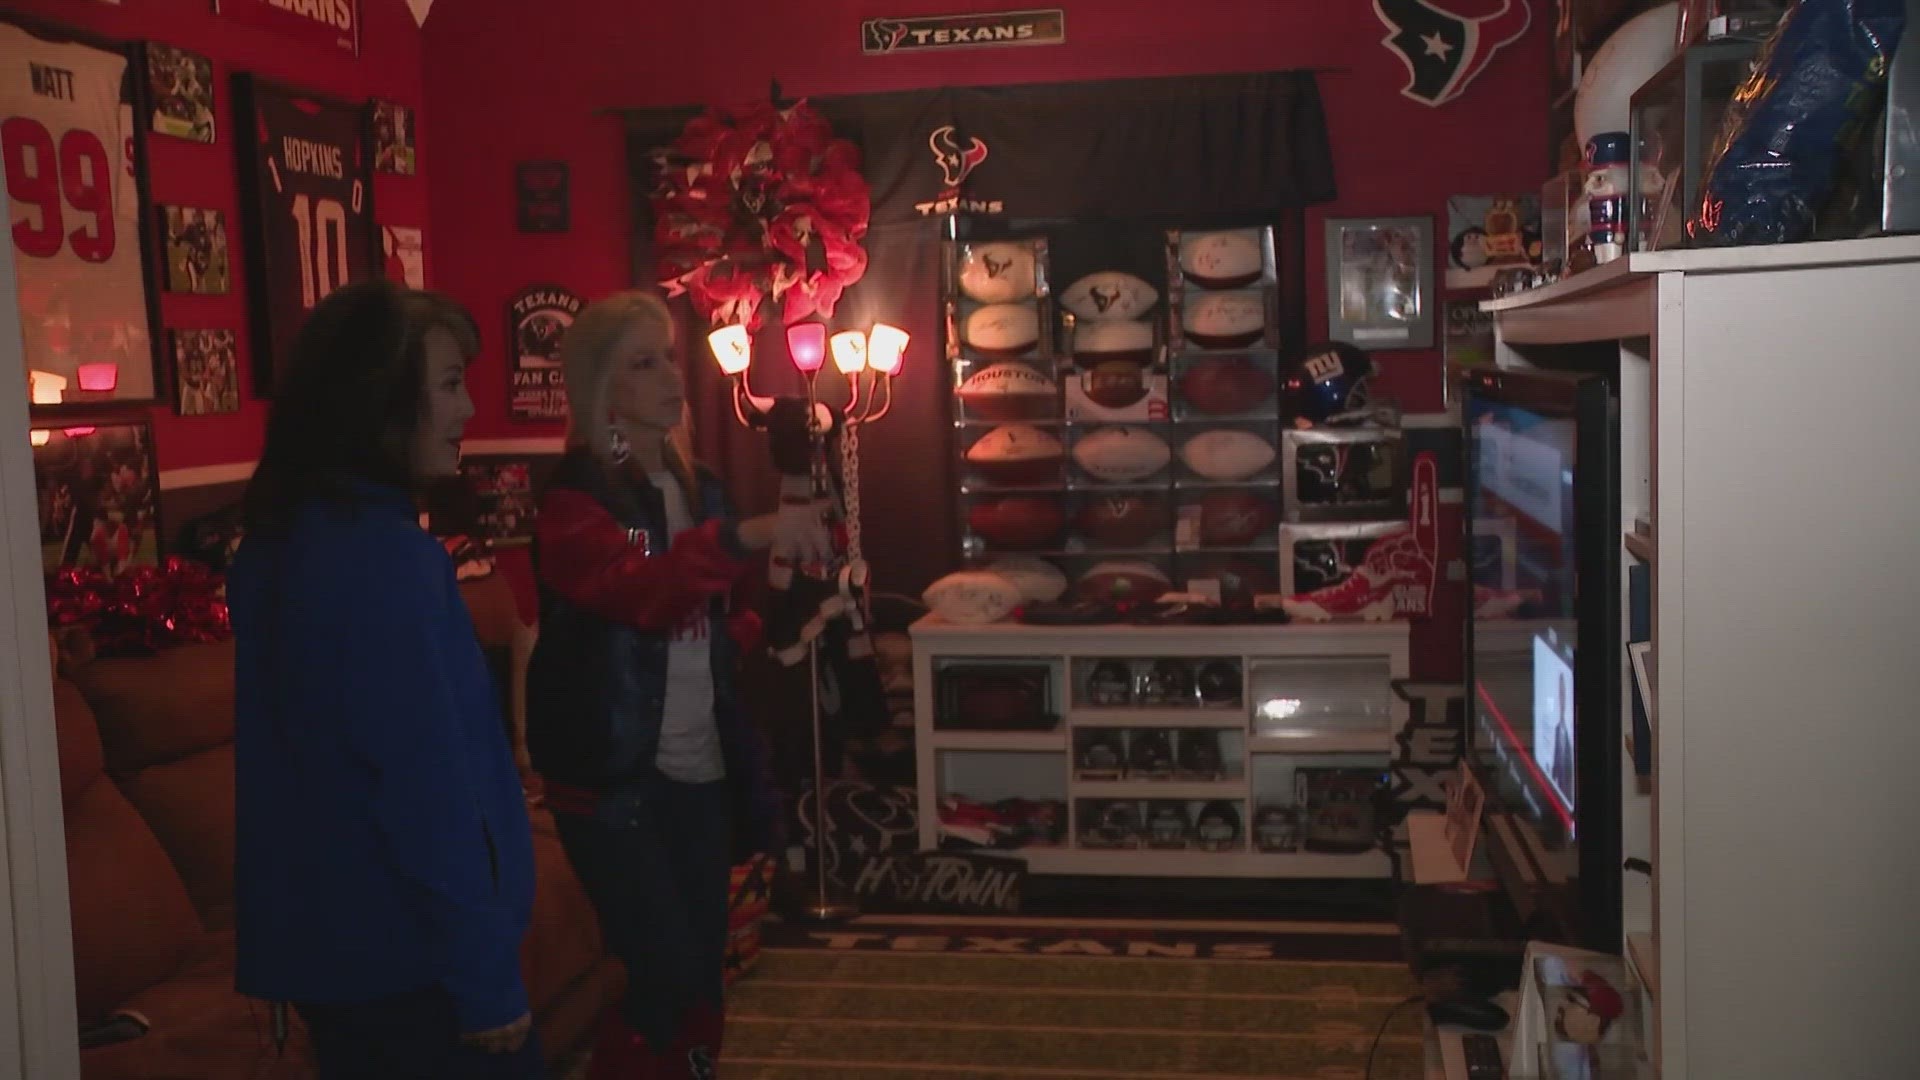 Inside Debbie's Texans 'she-cave' is everything from helmets and jerseys to Gatorade and potato chips.